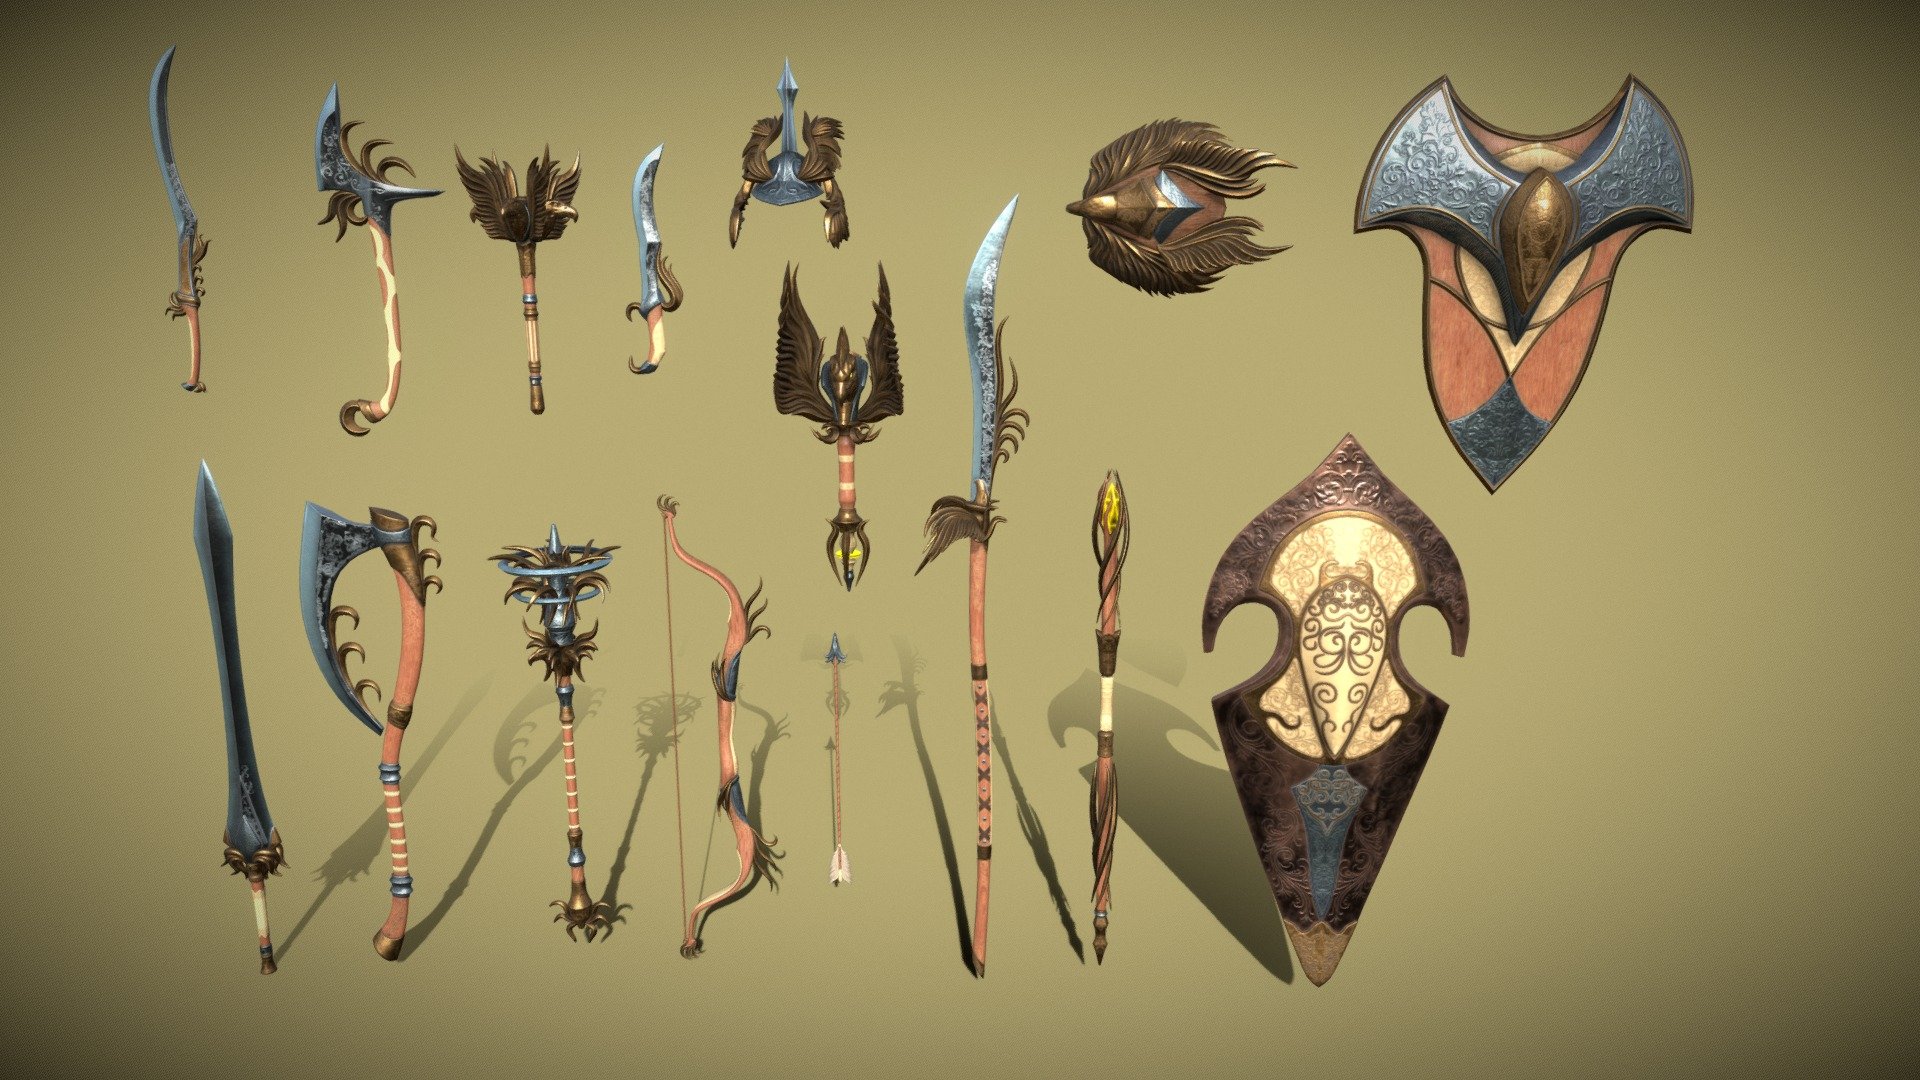 A set of fantasy Elf weapons.

The set consists of sixteen unique objects.

PBR textures have a resolution of 2048x2048.

Total polygons: 72860 triangles; 36945 vertices.

1) Sword (one-handed) - 3234 tris

2) Sword (two-handed) - 4336 tris

3) Mace (one-handed) - 7664 tris

4) Mace (two-handed) - 8572 tris

5) Ax (one-handed) - 1590 tris

6) Ax (two-handed) - 2614 tris

7) Lance - 4606 tris

8) Dagger - 1162 tris

9) Brass knuckles - 7170 tris

10) Bow - 4936 tris

11) Staff - 3600 tris

12) Scepter - 7252 tris

13) Shield (small) - 8318 tris

14) Shield (medium) - 3796 tris

15) Shield (great) - 3142 tris

16) Arrow - 868 tris

Archives with textures contain:

PNG textures for blender - base color, metallic, normal, roughness, opacity, glow

Texturing Unity (Metallic Smoothness) - AlbedoTransparency, MetallicSmoothness, Normal, Emission

Texturing Unreal Engine - BaseColor, Normal, OcclusionRoughnessMetallic, Emissive - Fantasy Elf Weapon Set - 3D model by zilbeerman 3d model